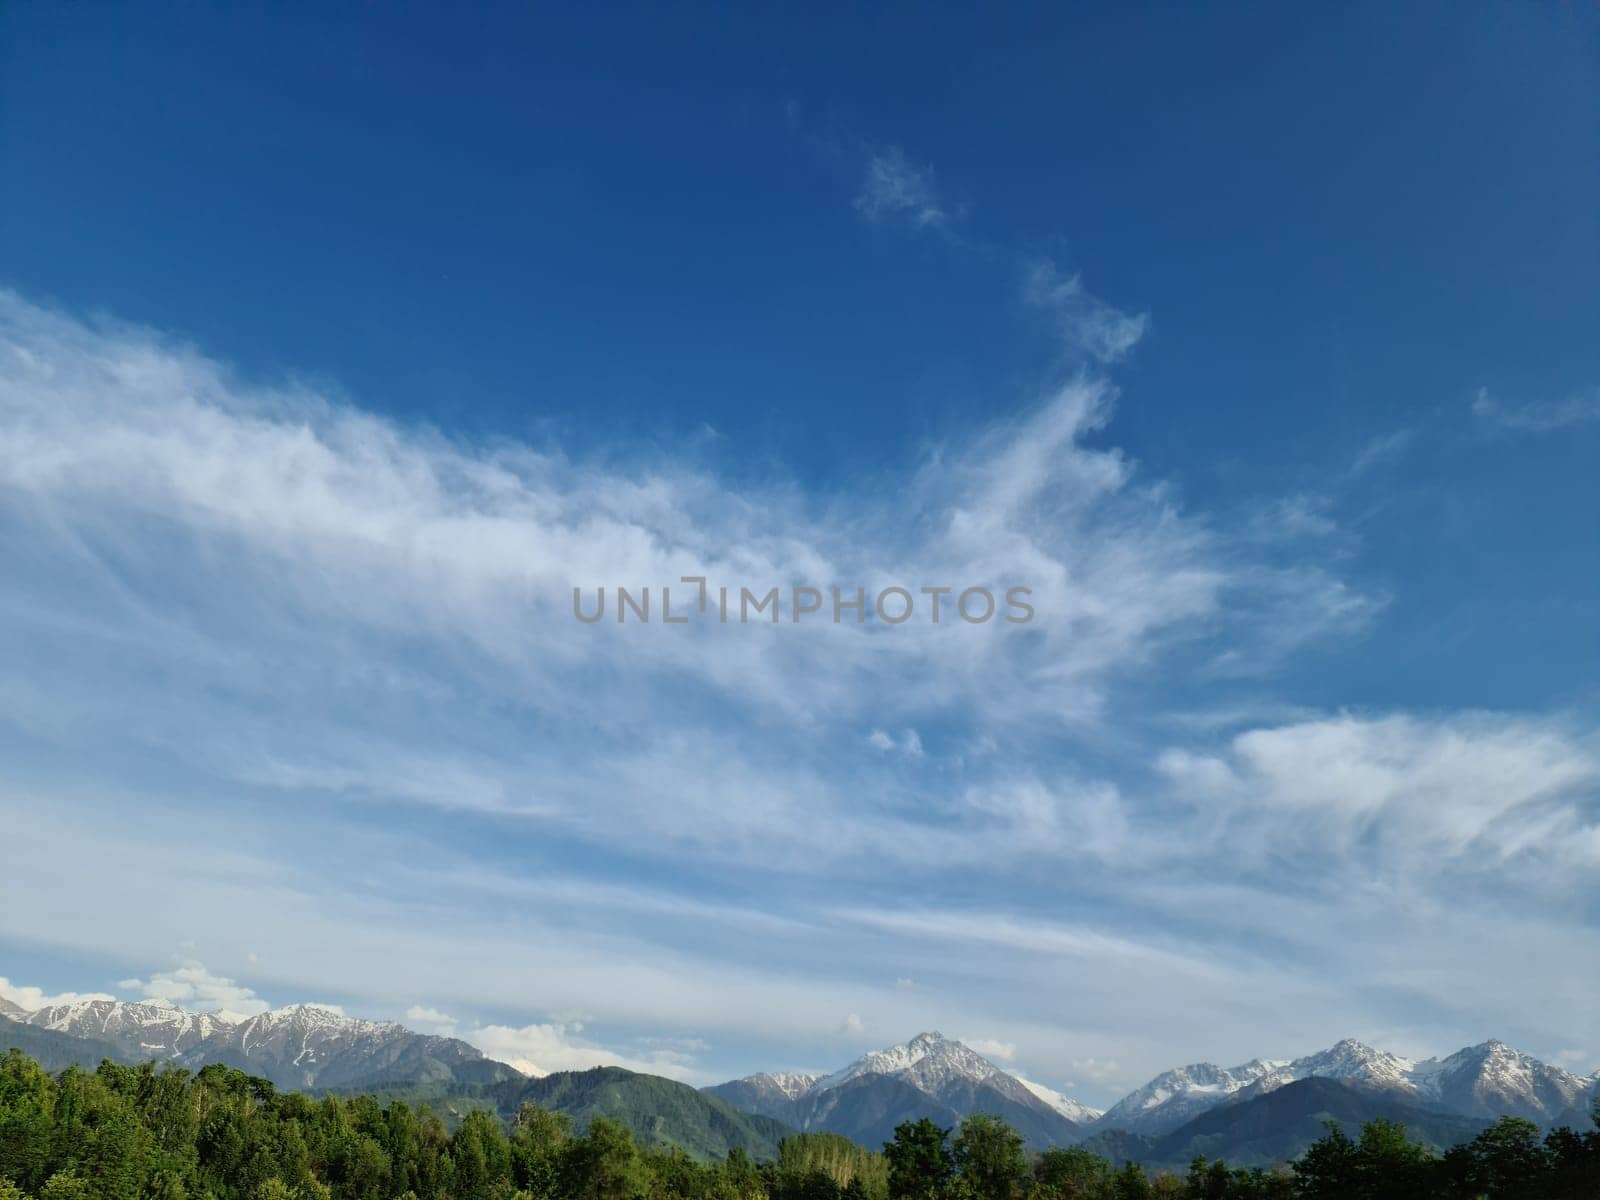 A natural landscape with a clear blue sky filled with fluffy white cumulus clouds, showcasing a stunning ecoregion of highland grasslands and majestic mountains in the background.